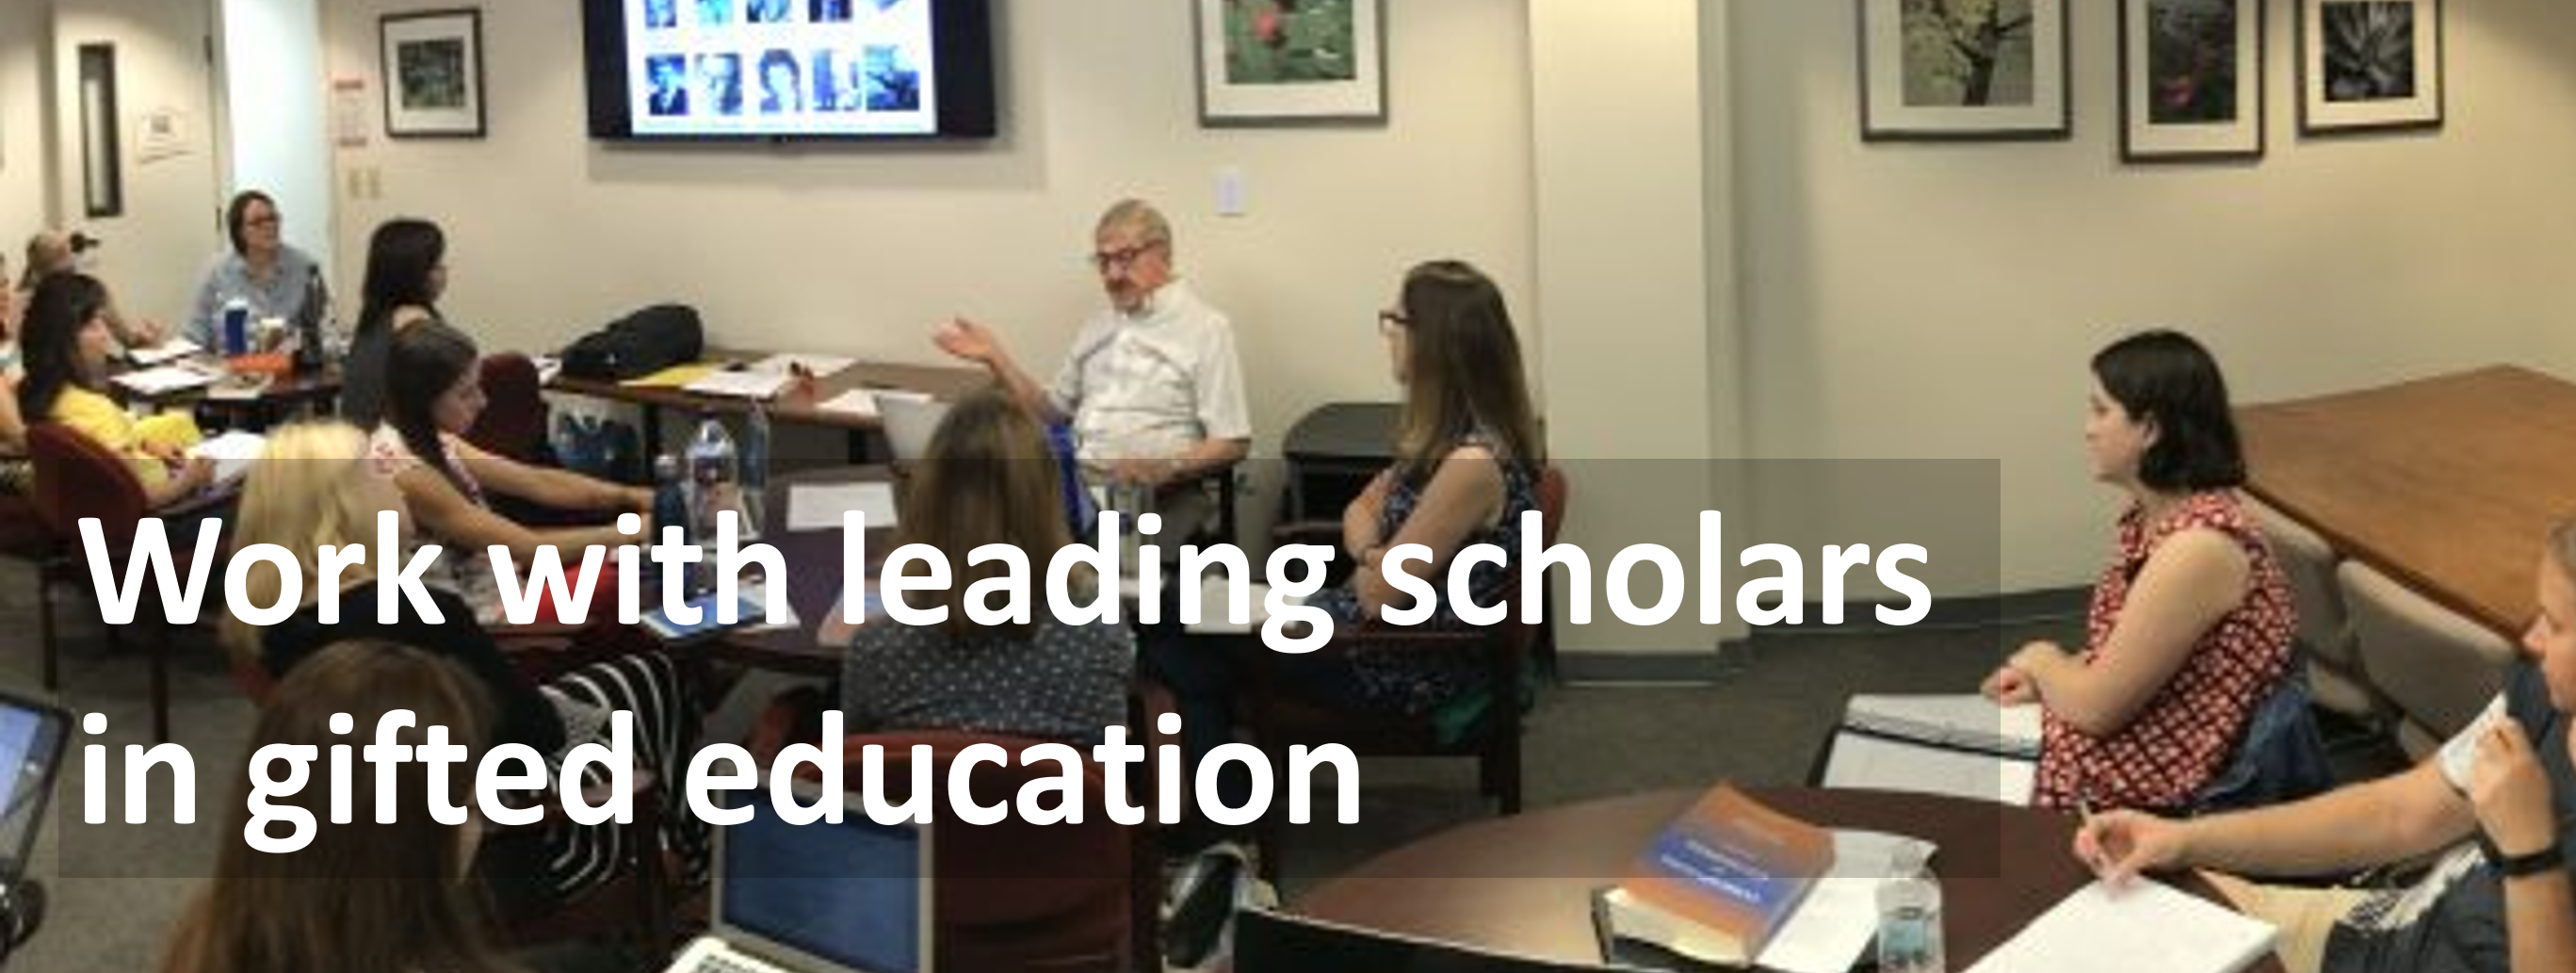 Photo of Joe Renzulli teaching class with a caption, "Work with leading scholars in gifted education."